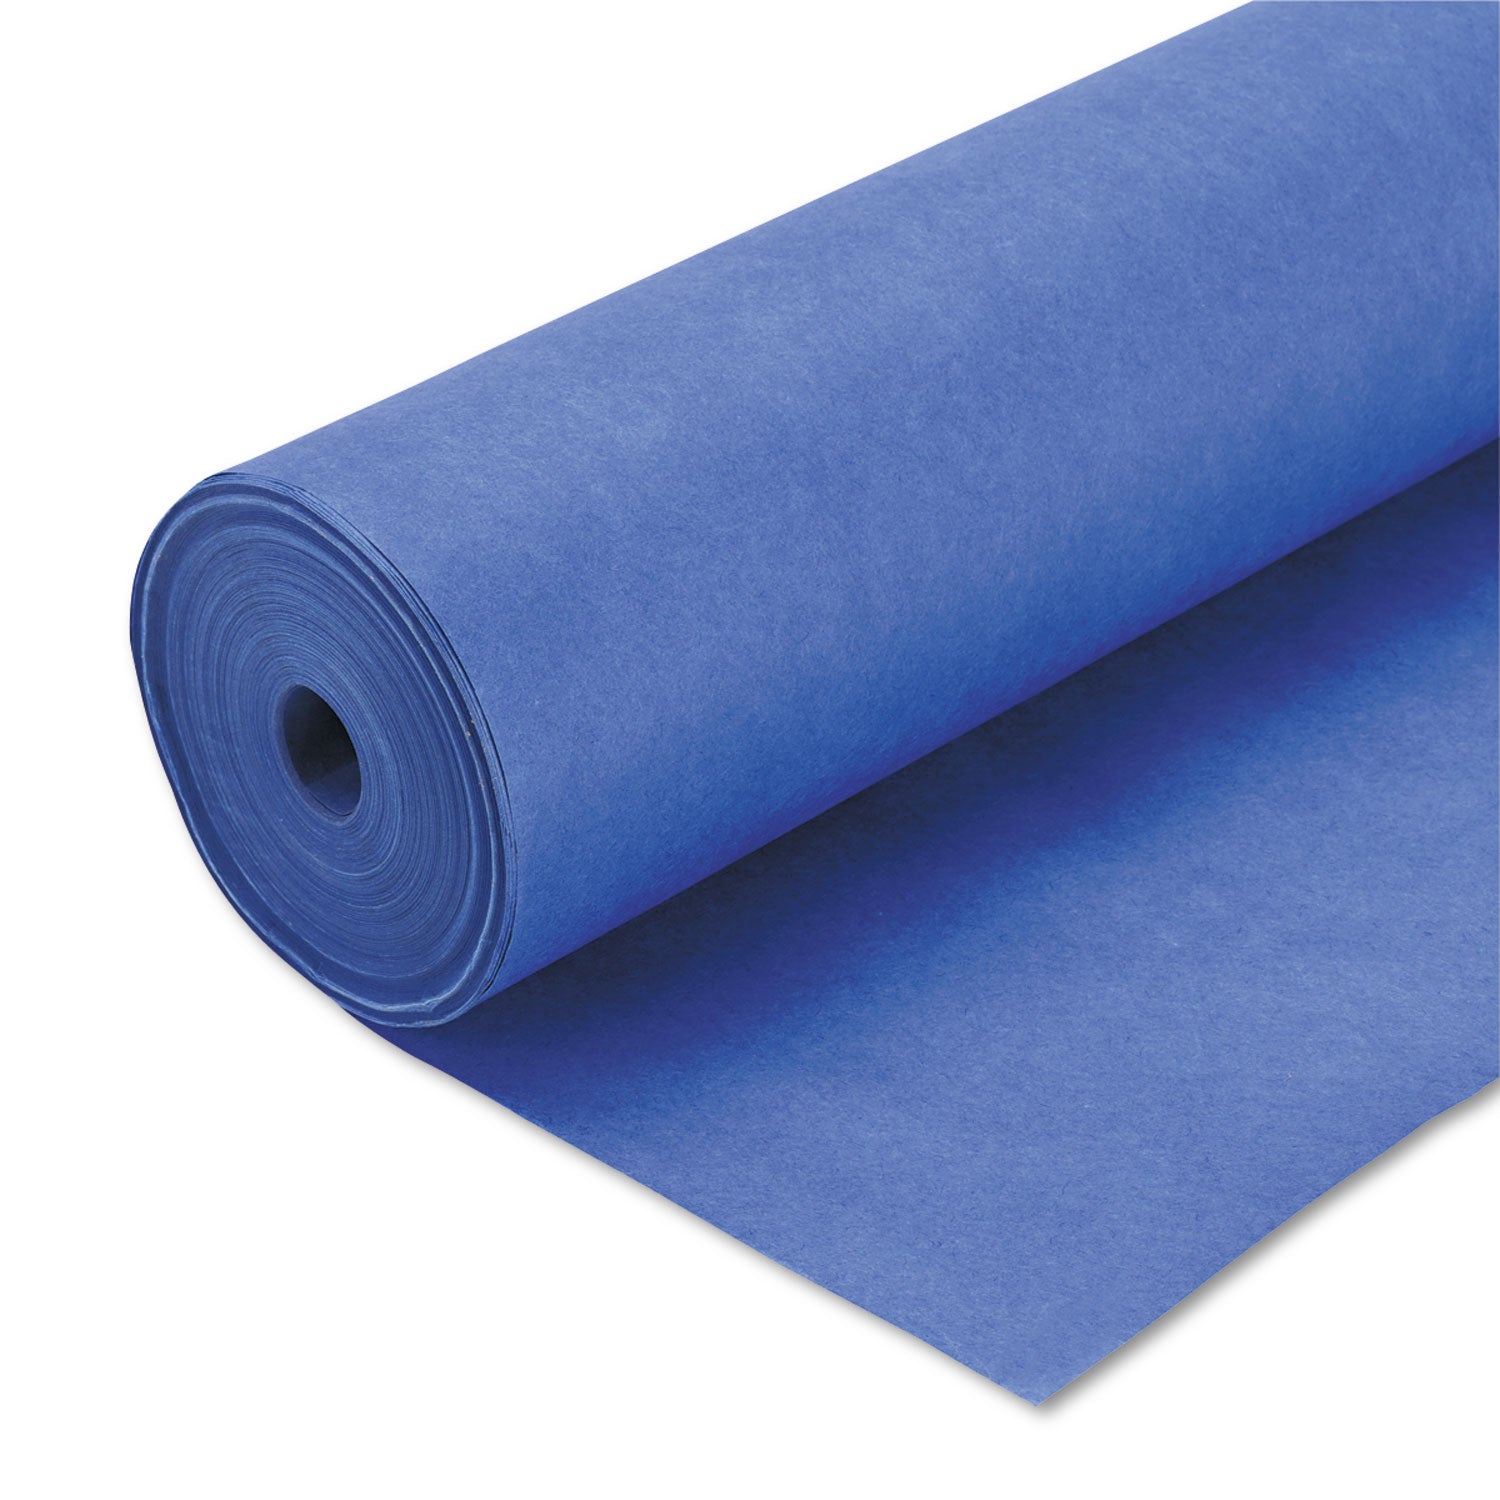 spectra-artkraft-duo-finish-paper-48-lb-text-weight-48-x-200-ft-royal-blue_pac67204 - 1